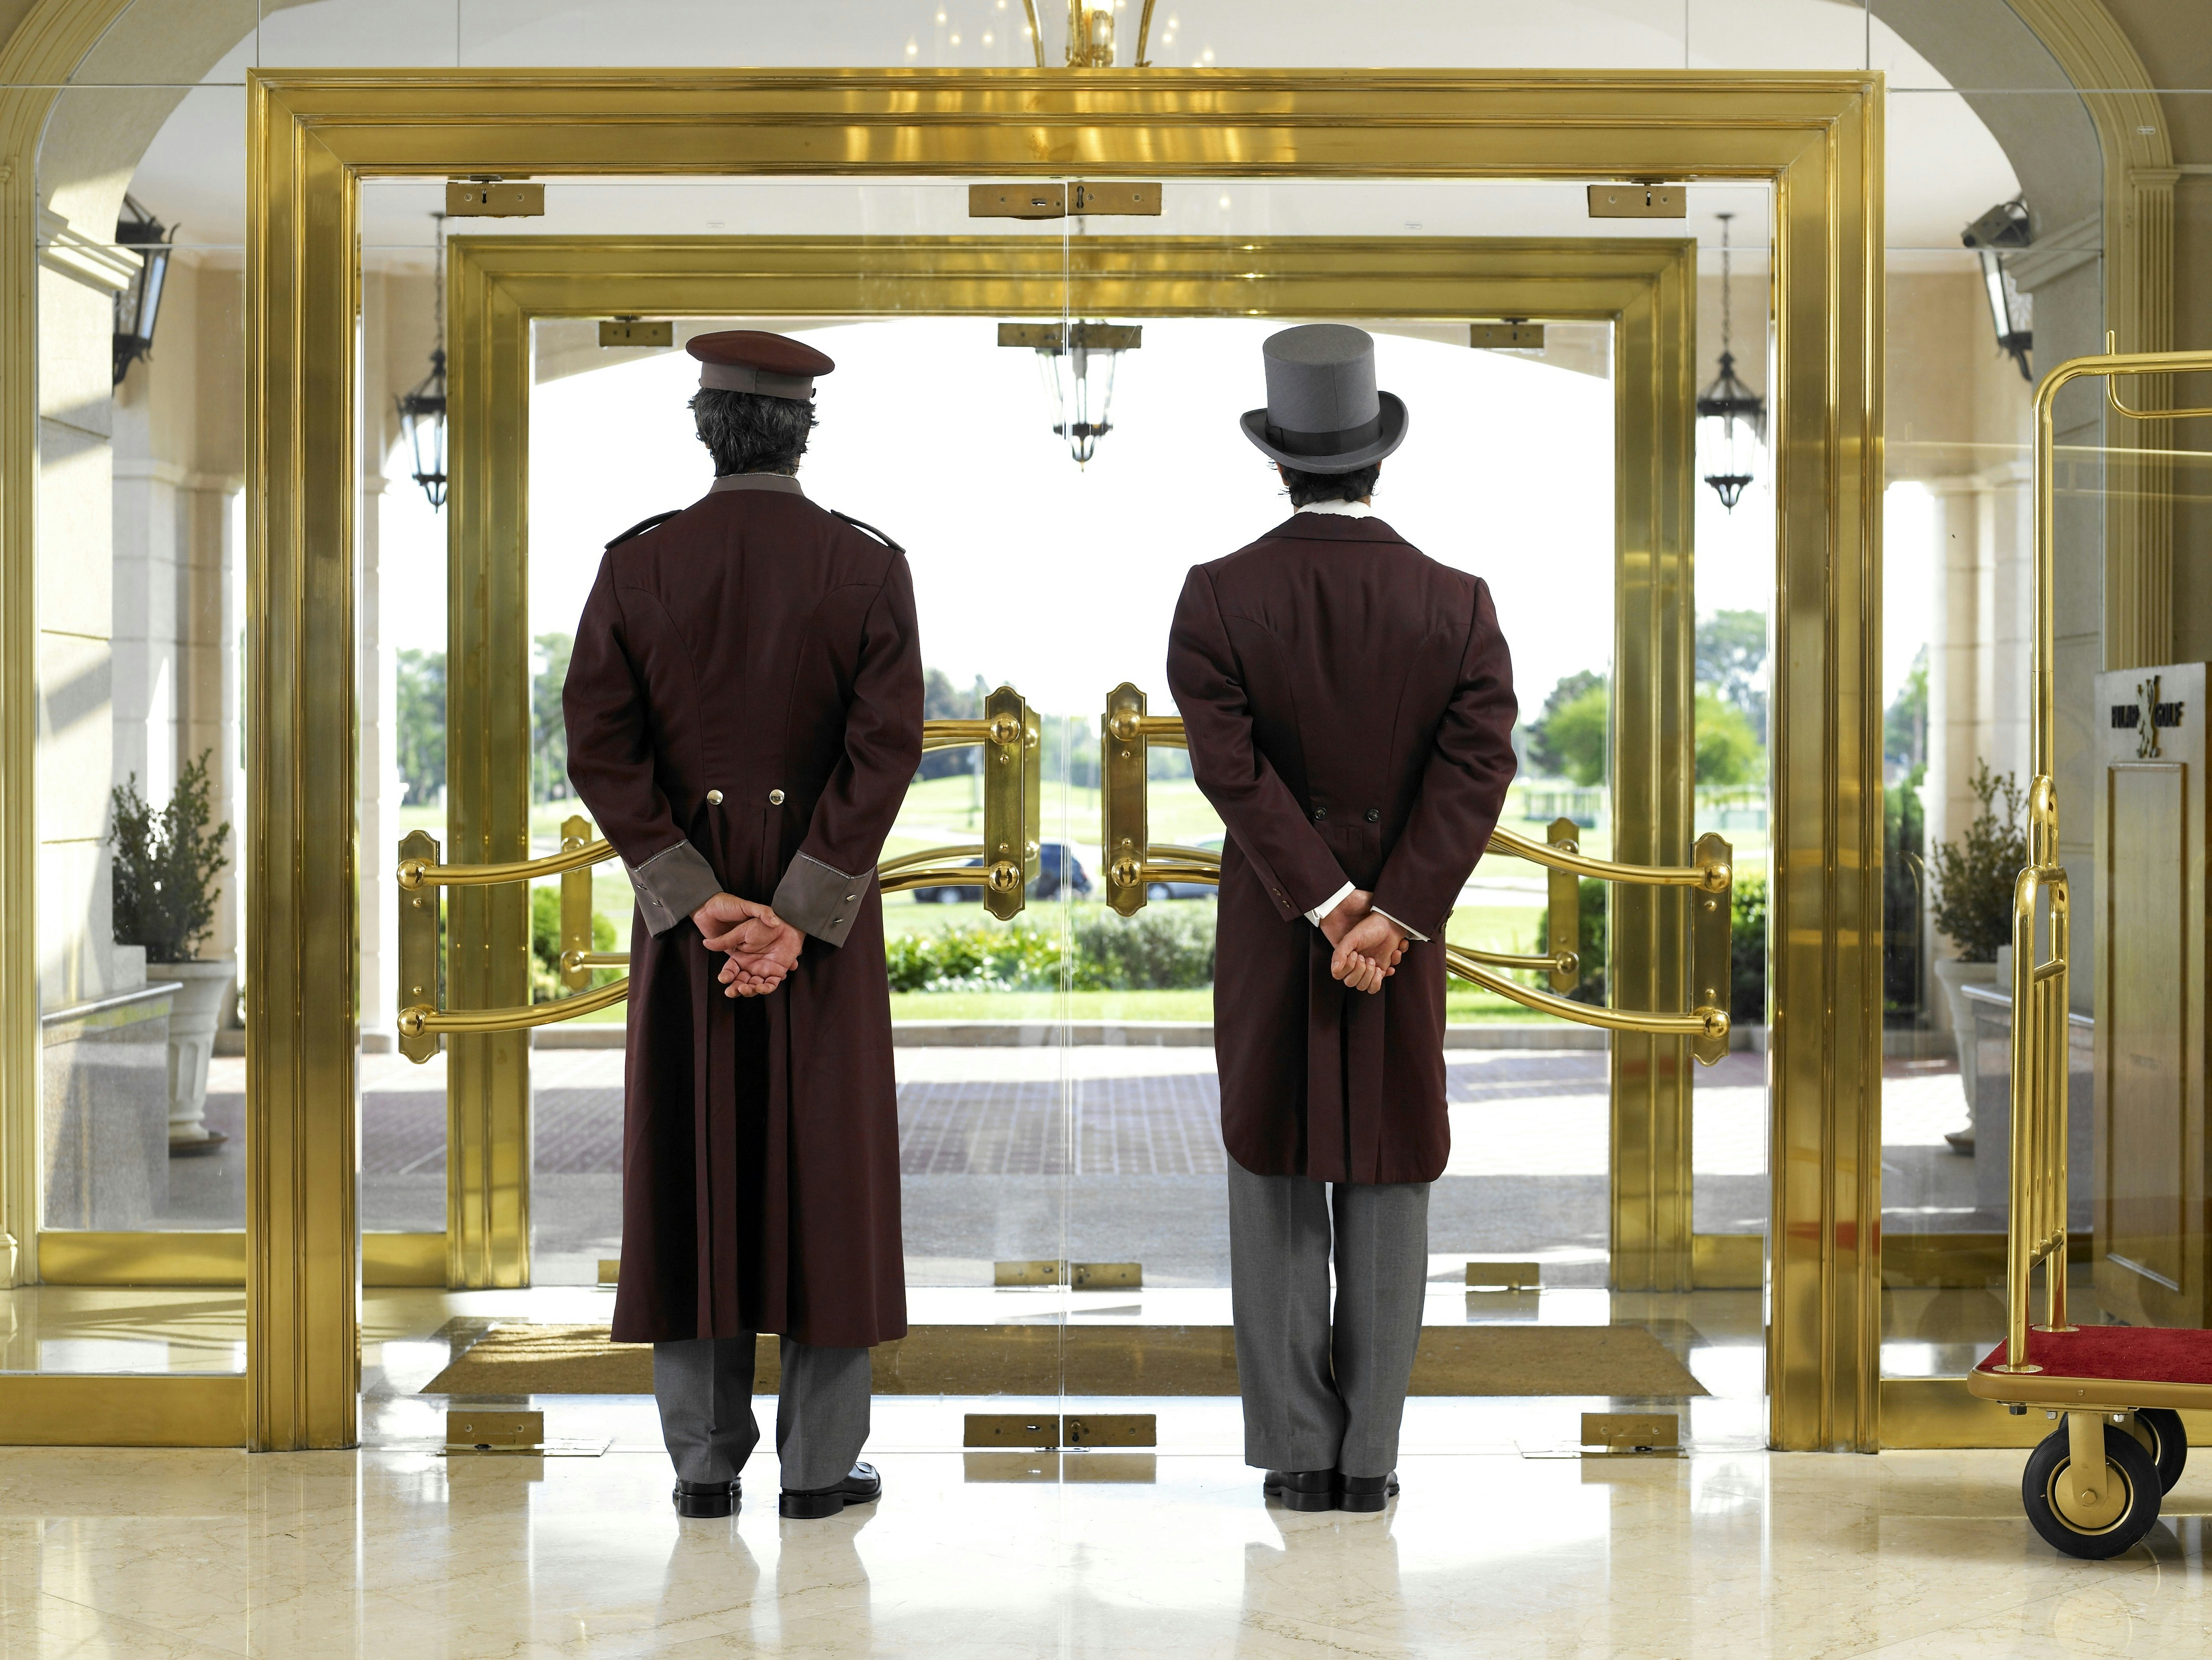 A concierge and bellboy wait at the entrance to a hotel. Both are dressed in brown suits, with their backs to the camera. One wears a smart grey top hat. Through the glass doors some greenery is visible.